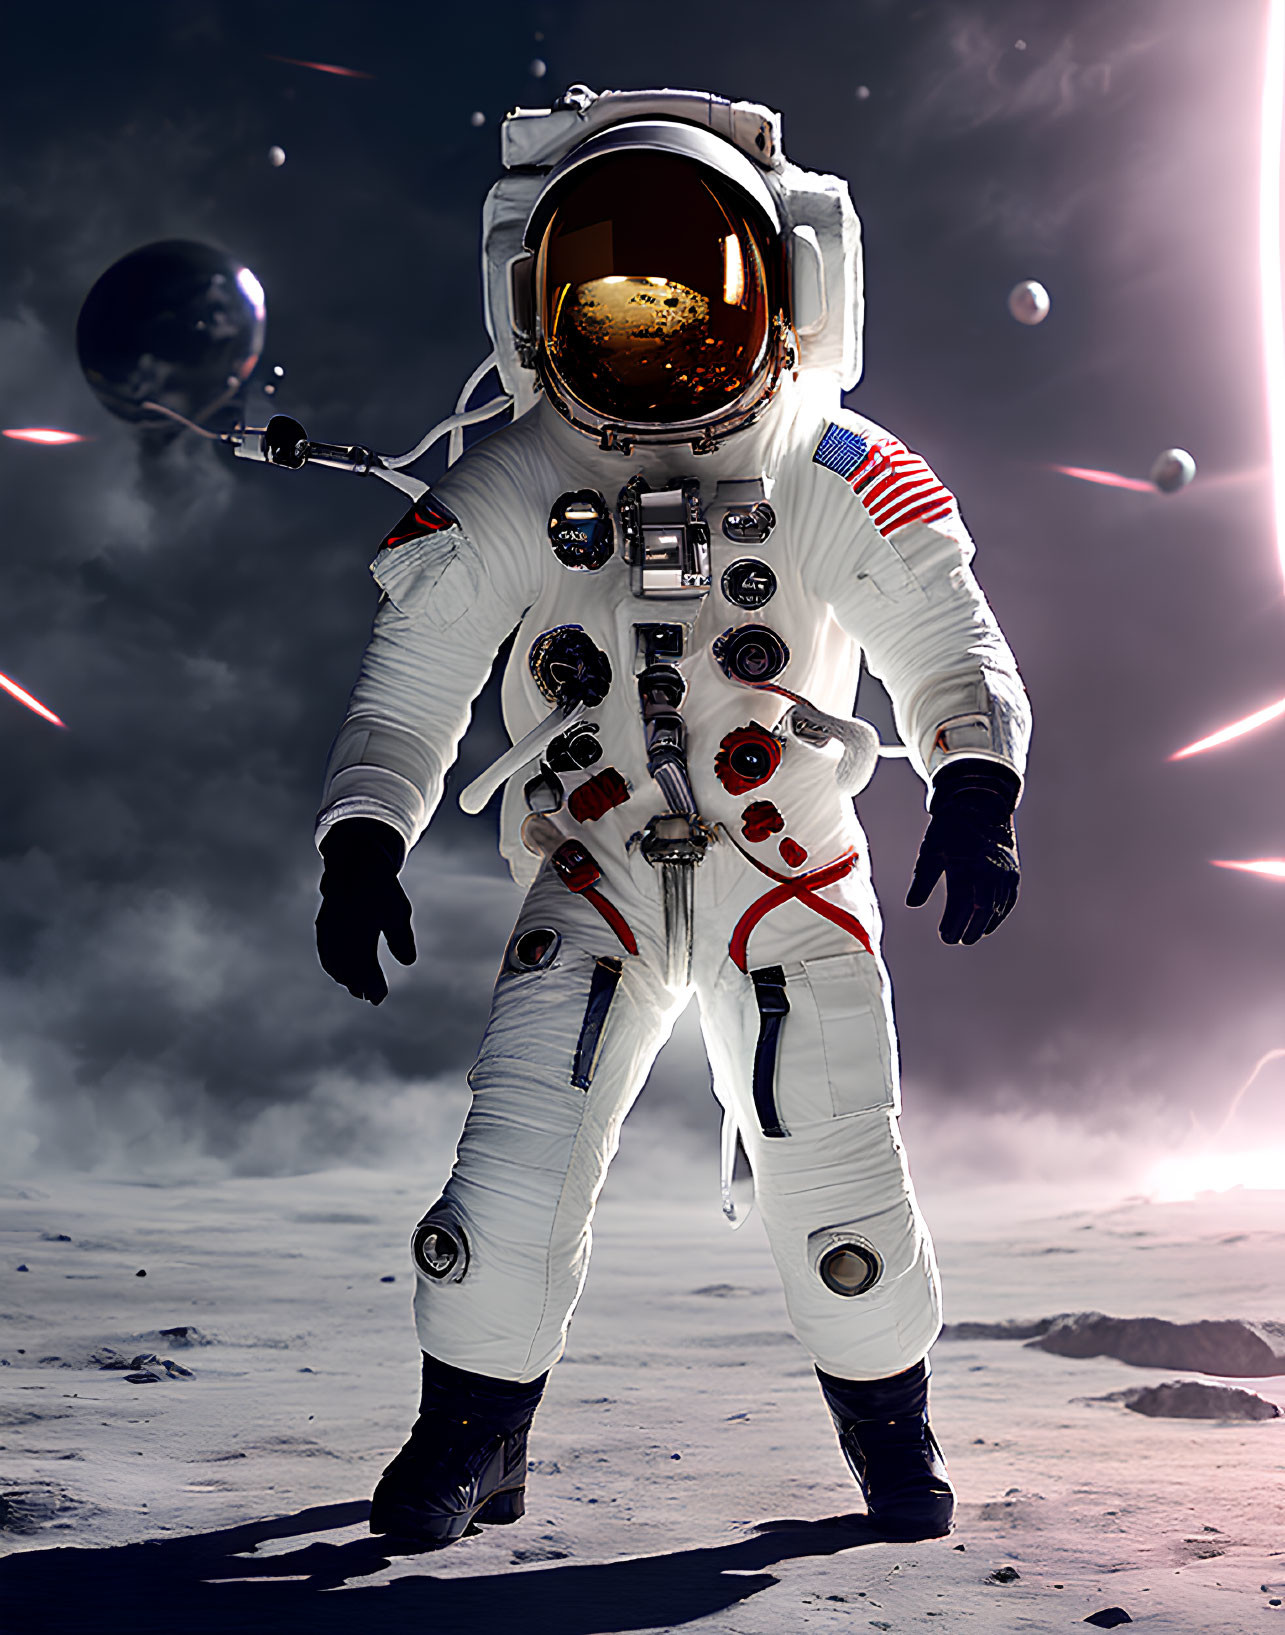 Astronaut in white space suit on rocky surface with American flag patch